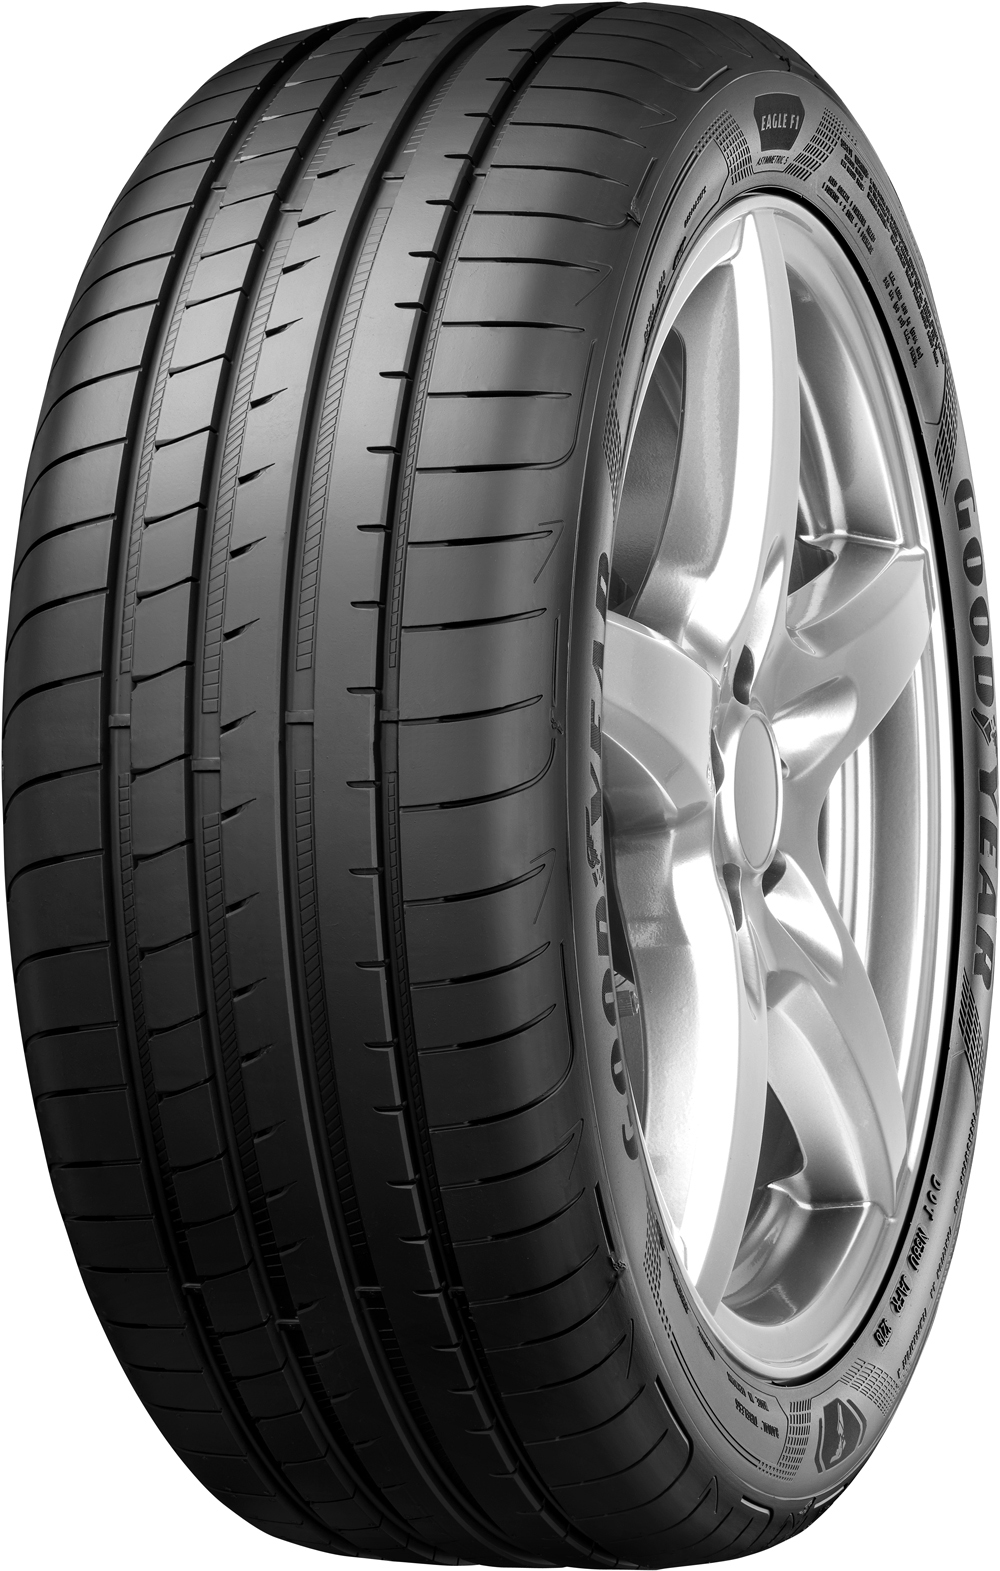 Anvelope auto GOODYEAR EAGF1AS5X XL FP 225/45 R17 94Y